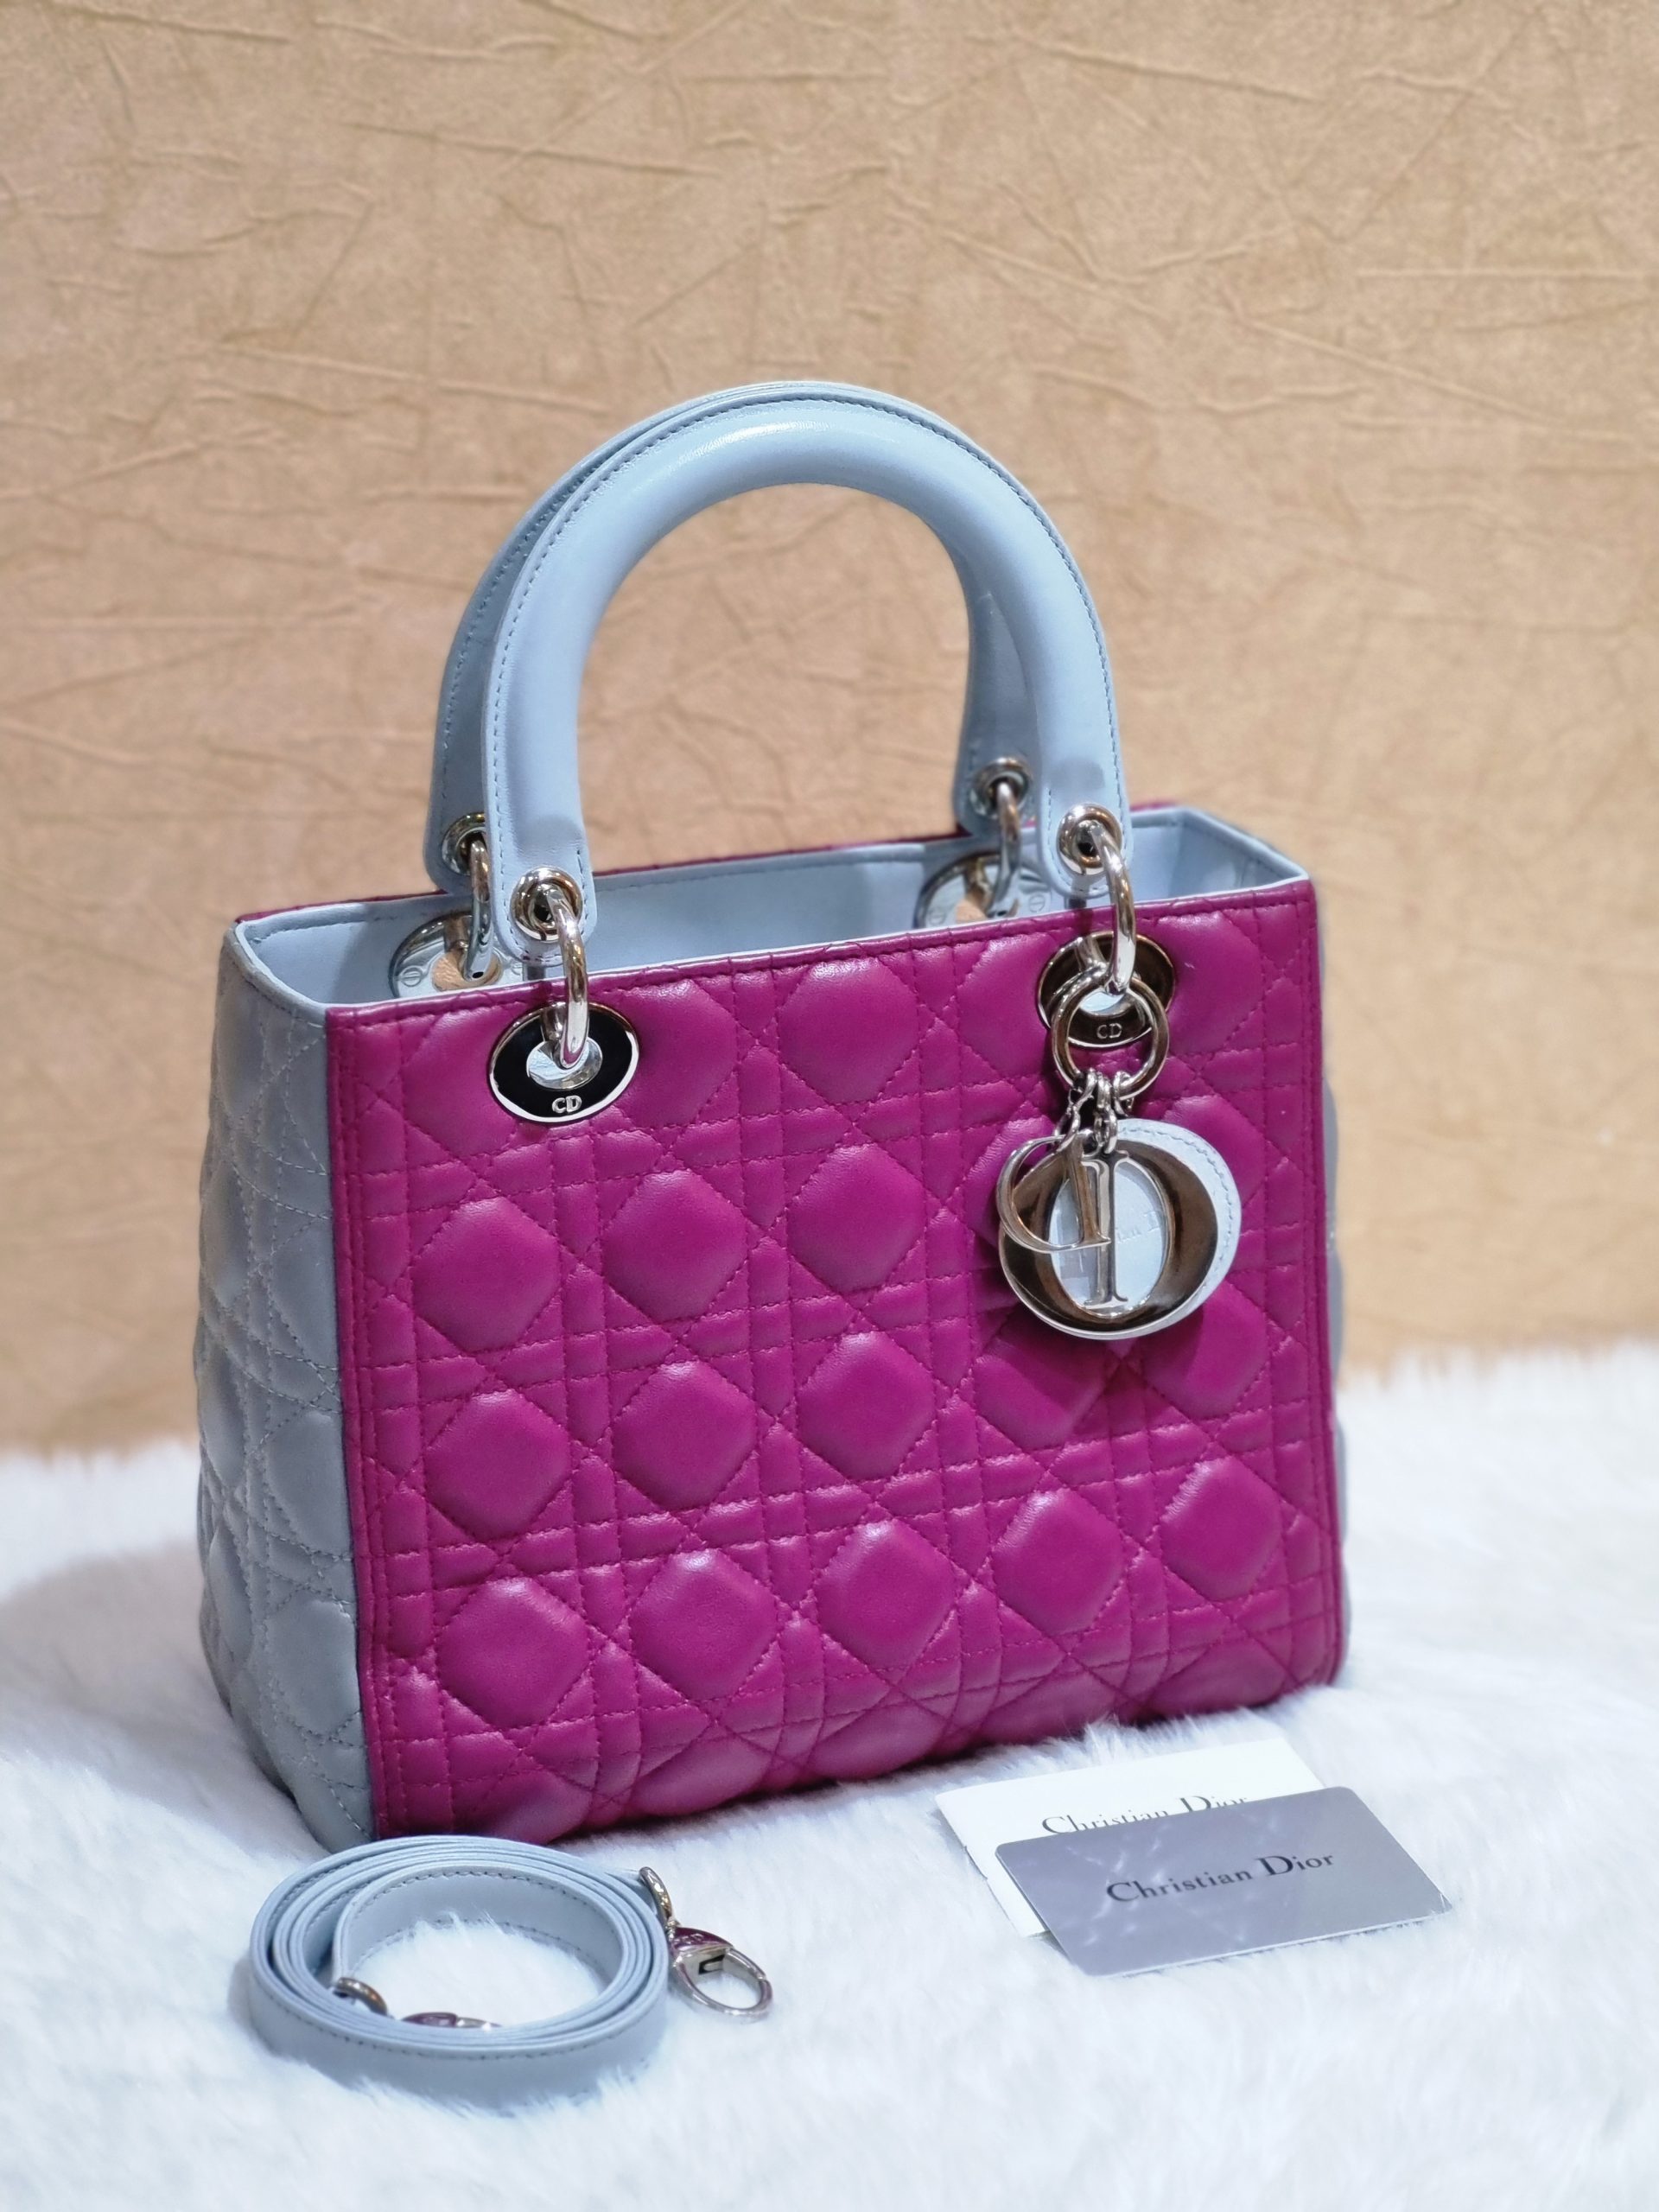 Lady Dior Tricolor Limited Edition Bag